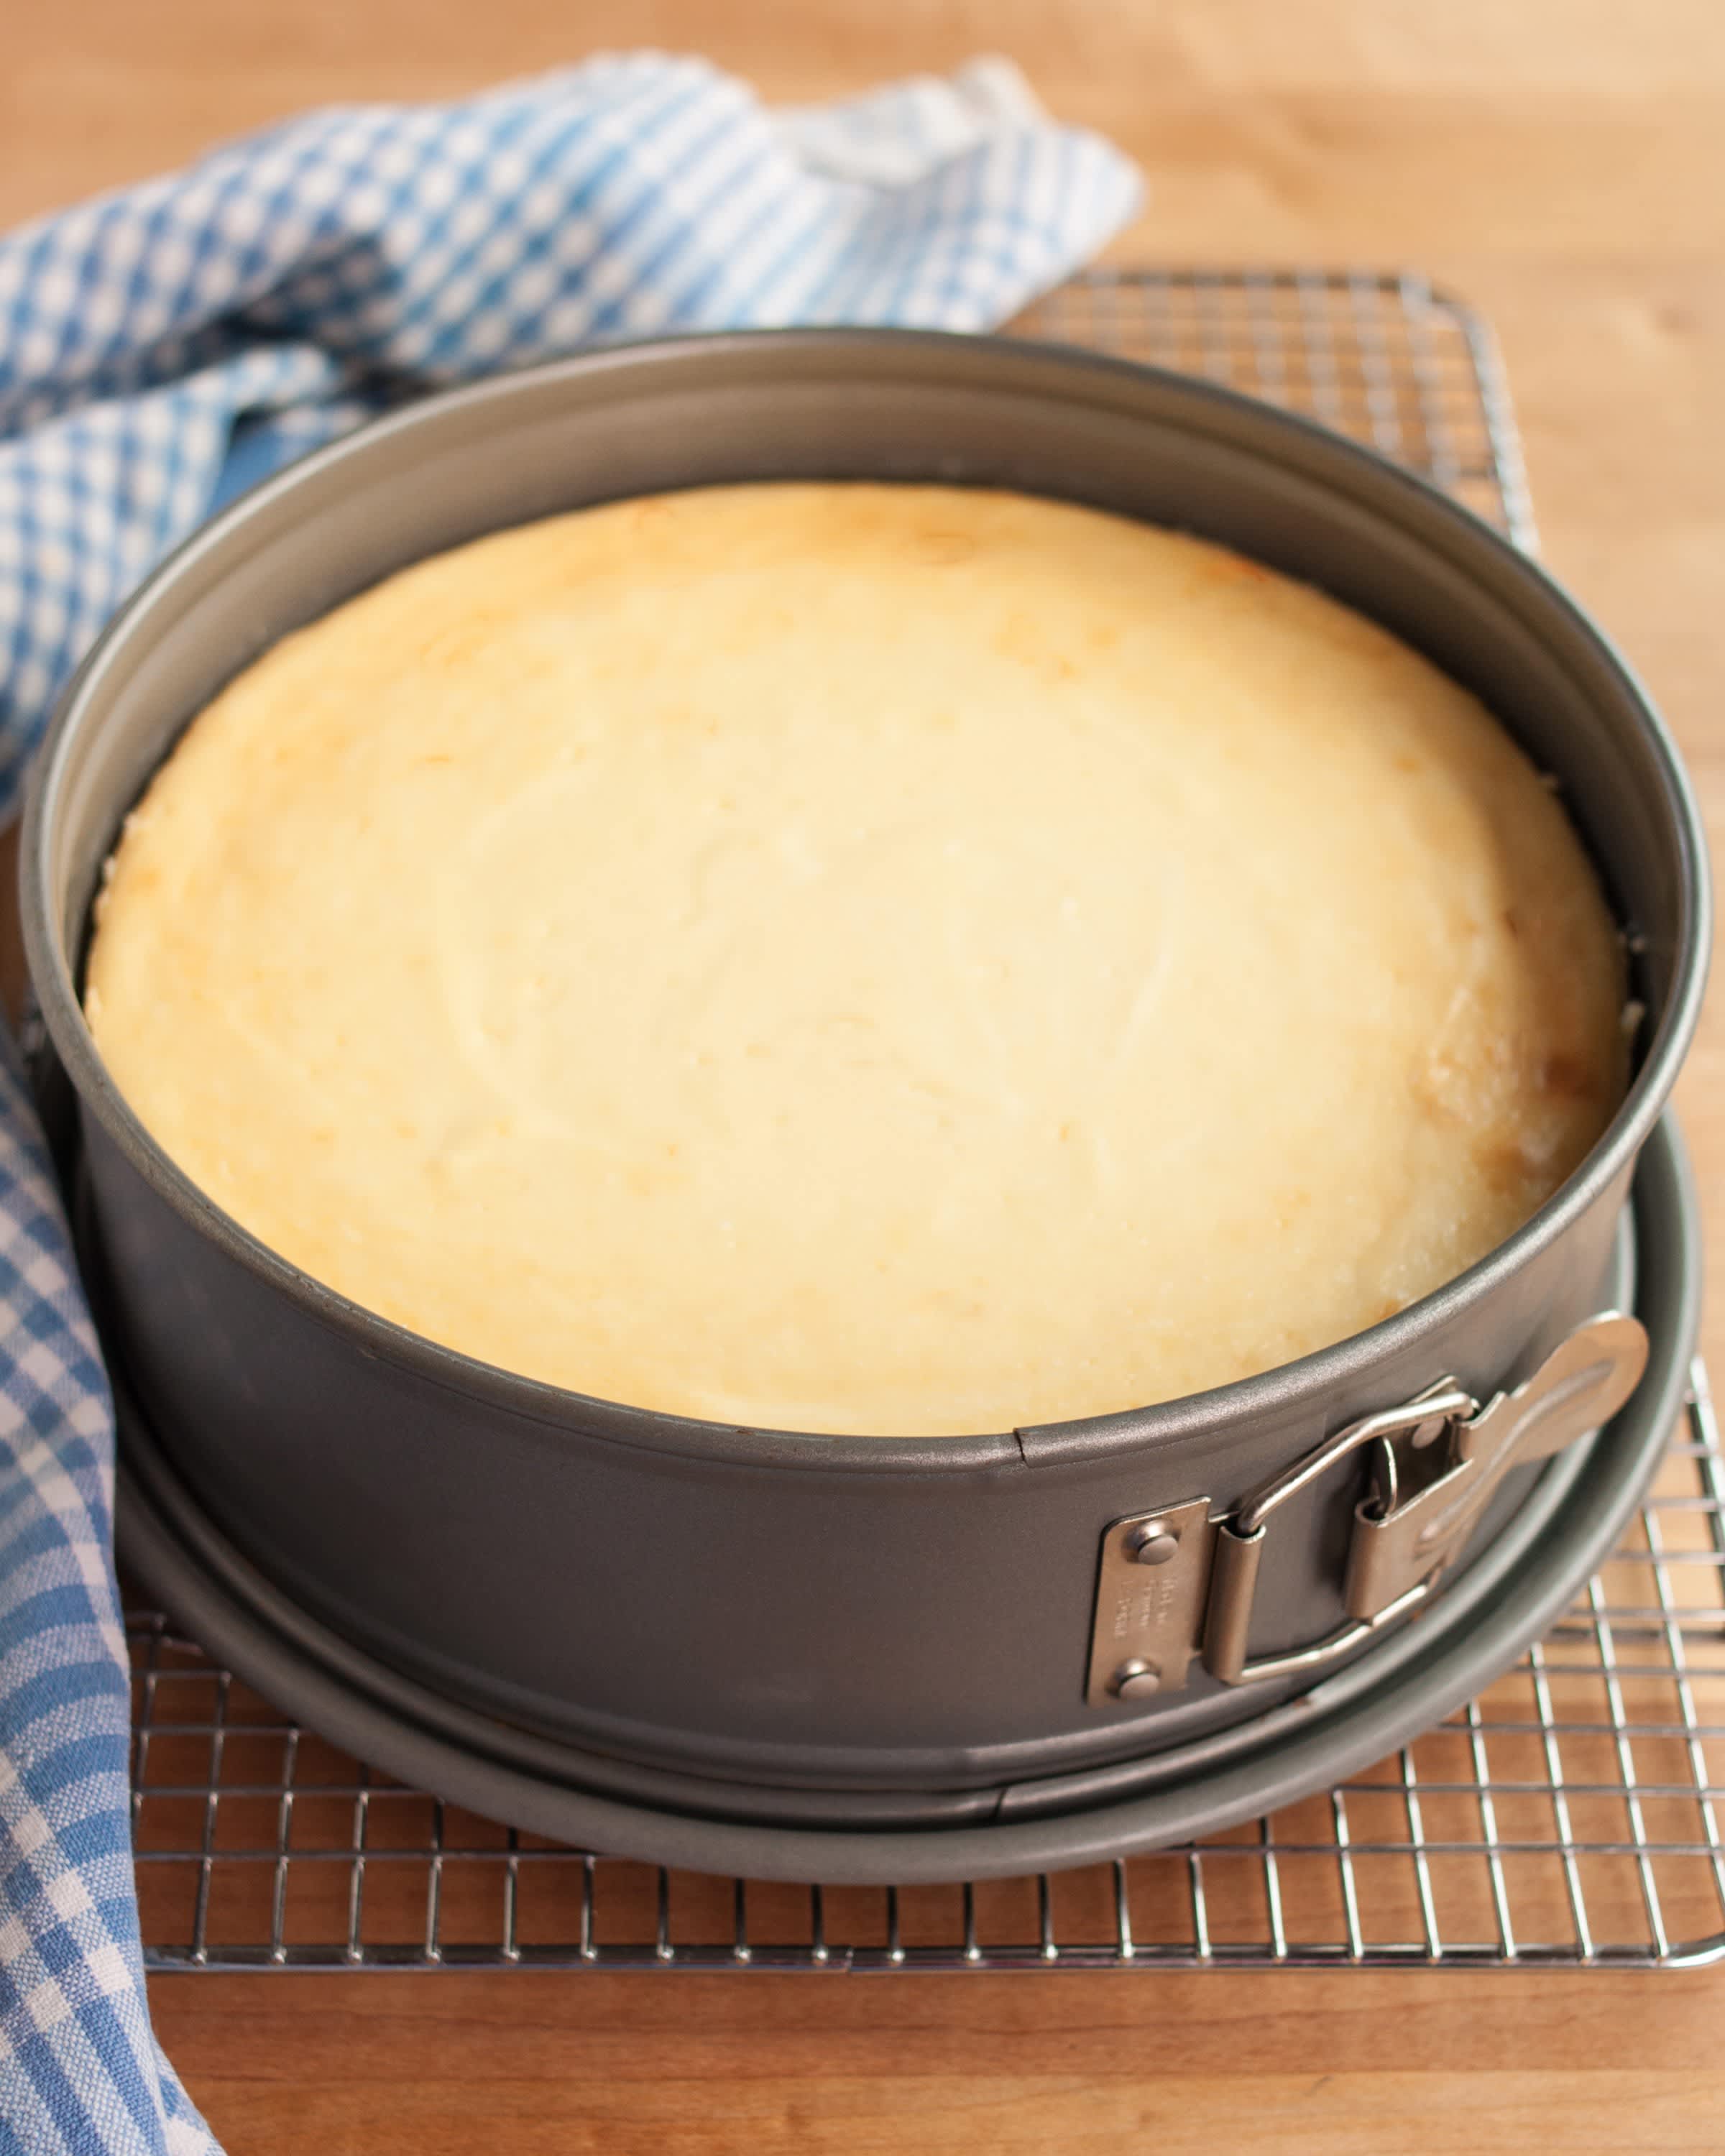 Use a Springform Pan for the Cheesecake